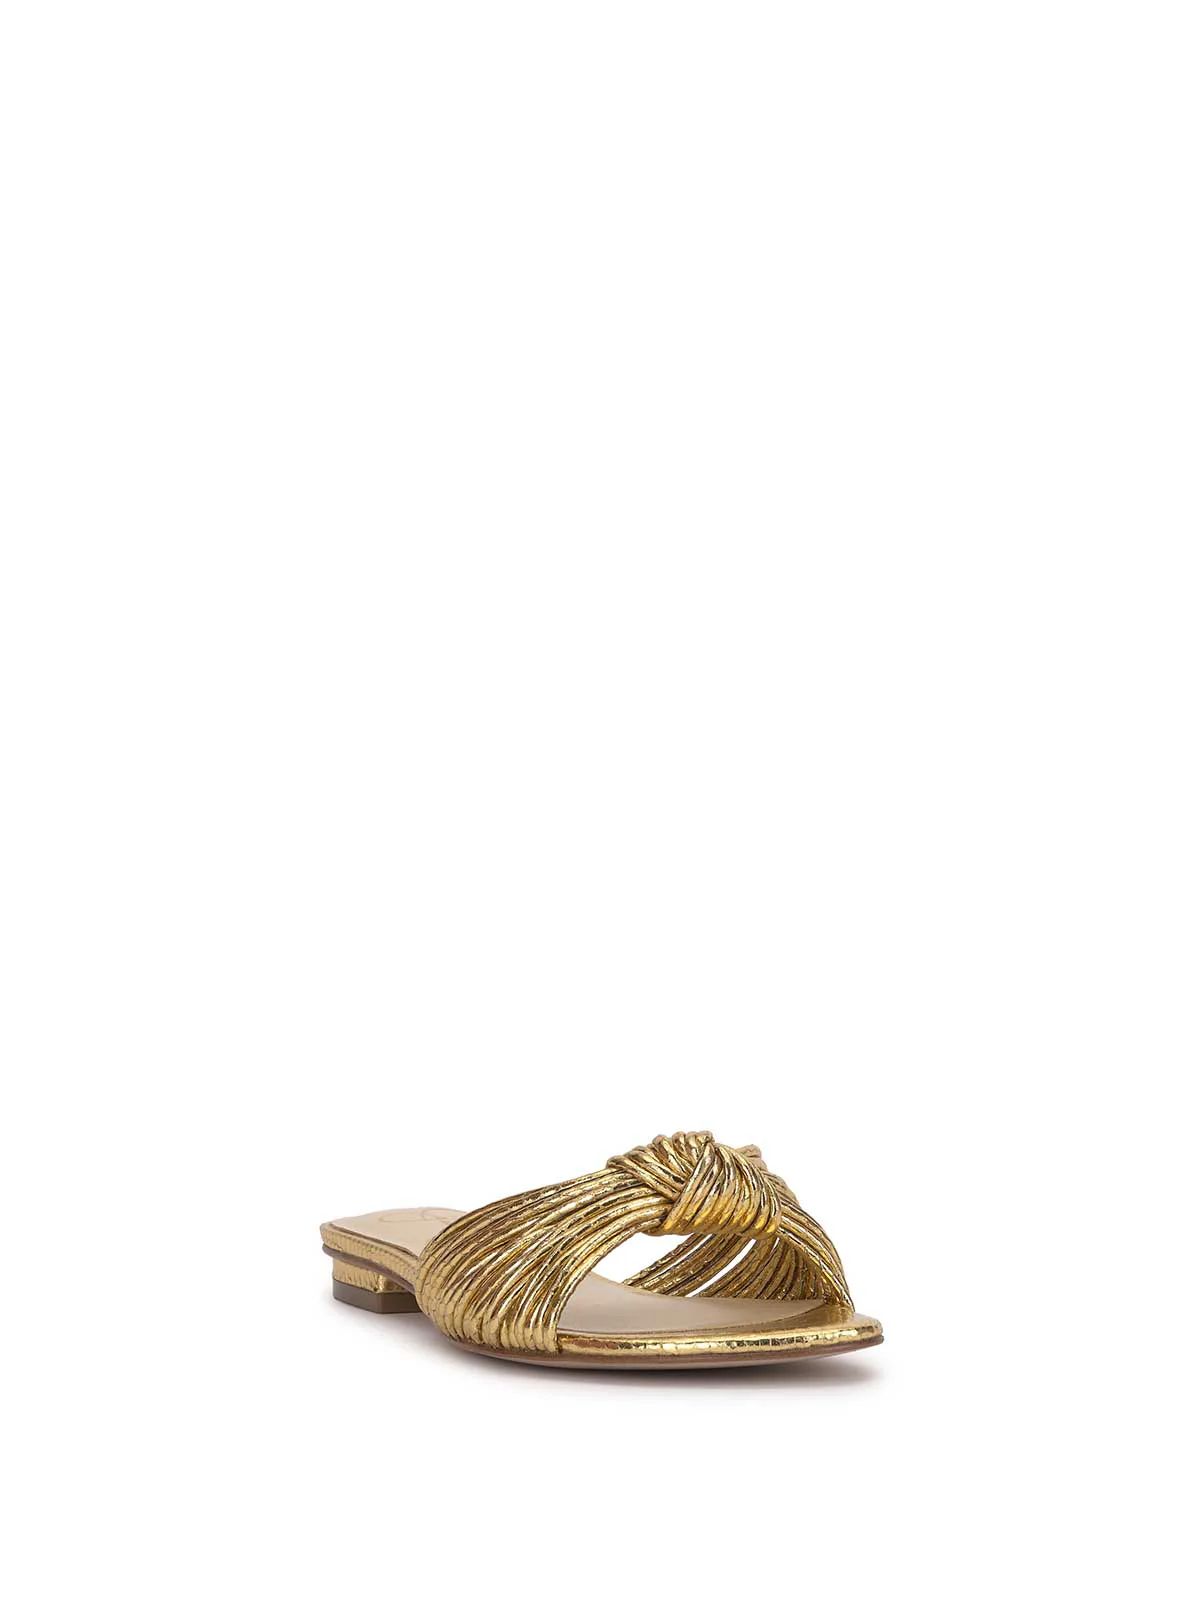 Dydra Knotted Flat Sandal in Gold | Jessica Simpson E Commerce